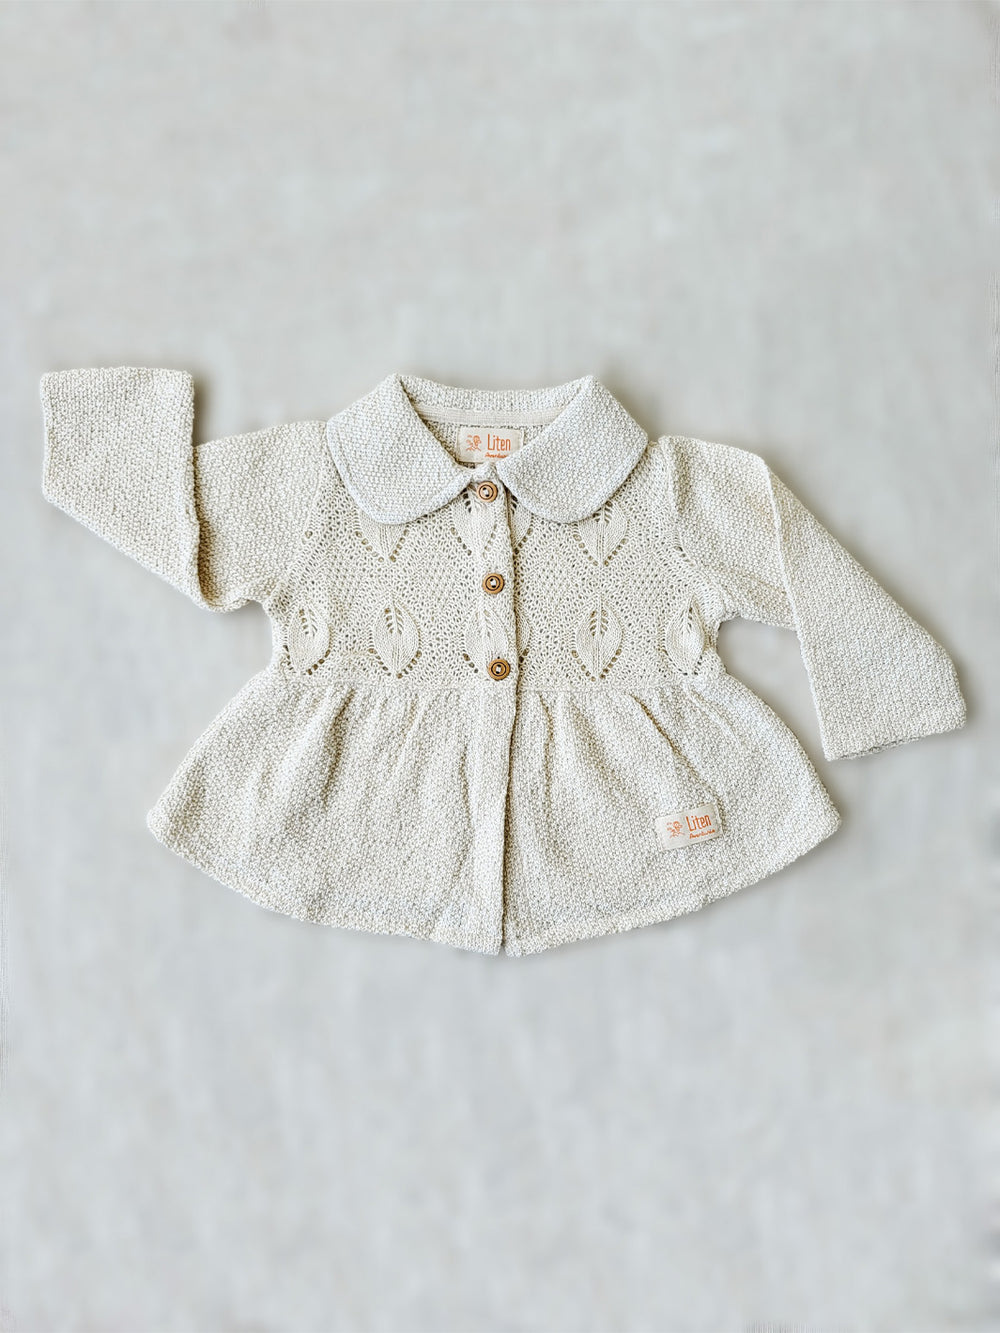 Our Ibis Jacket is the perfect addition to your little girl’s wardrobe! A beautifully crafted knitted jacket with a unique leaf-inspired pattern and captivating rounded flat collar. All in stylish A-fit silhouette with wooden buttons. She’ll look (and feel!) extra special in this elegant and one-of-a-kind piece! Liten Aventuris Colelctions. Bomullsjacka, Barnjacka, Babyjacka.